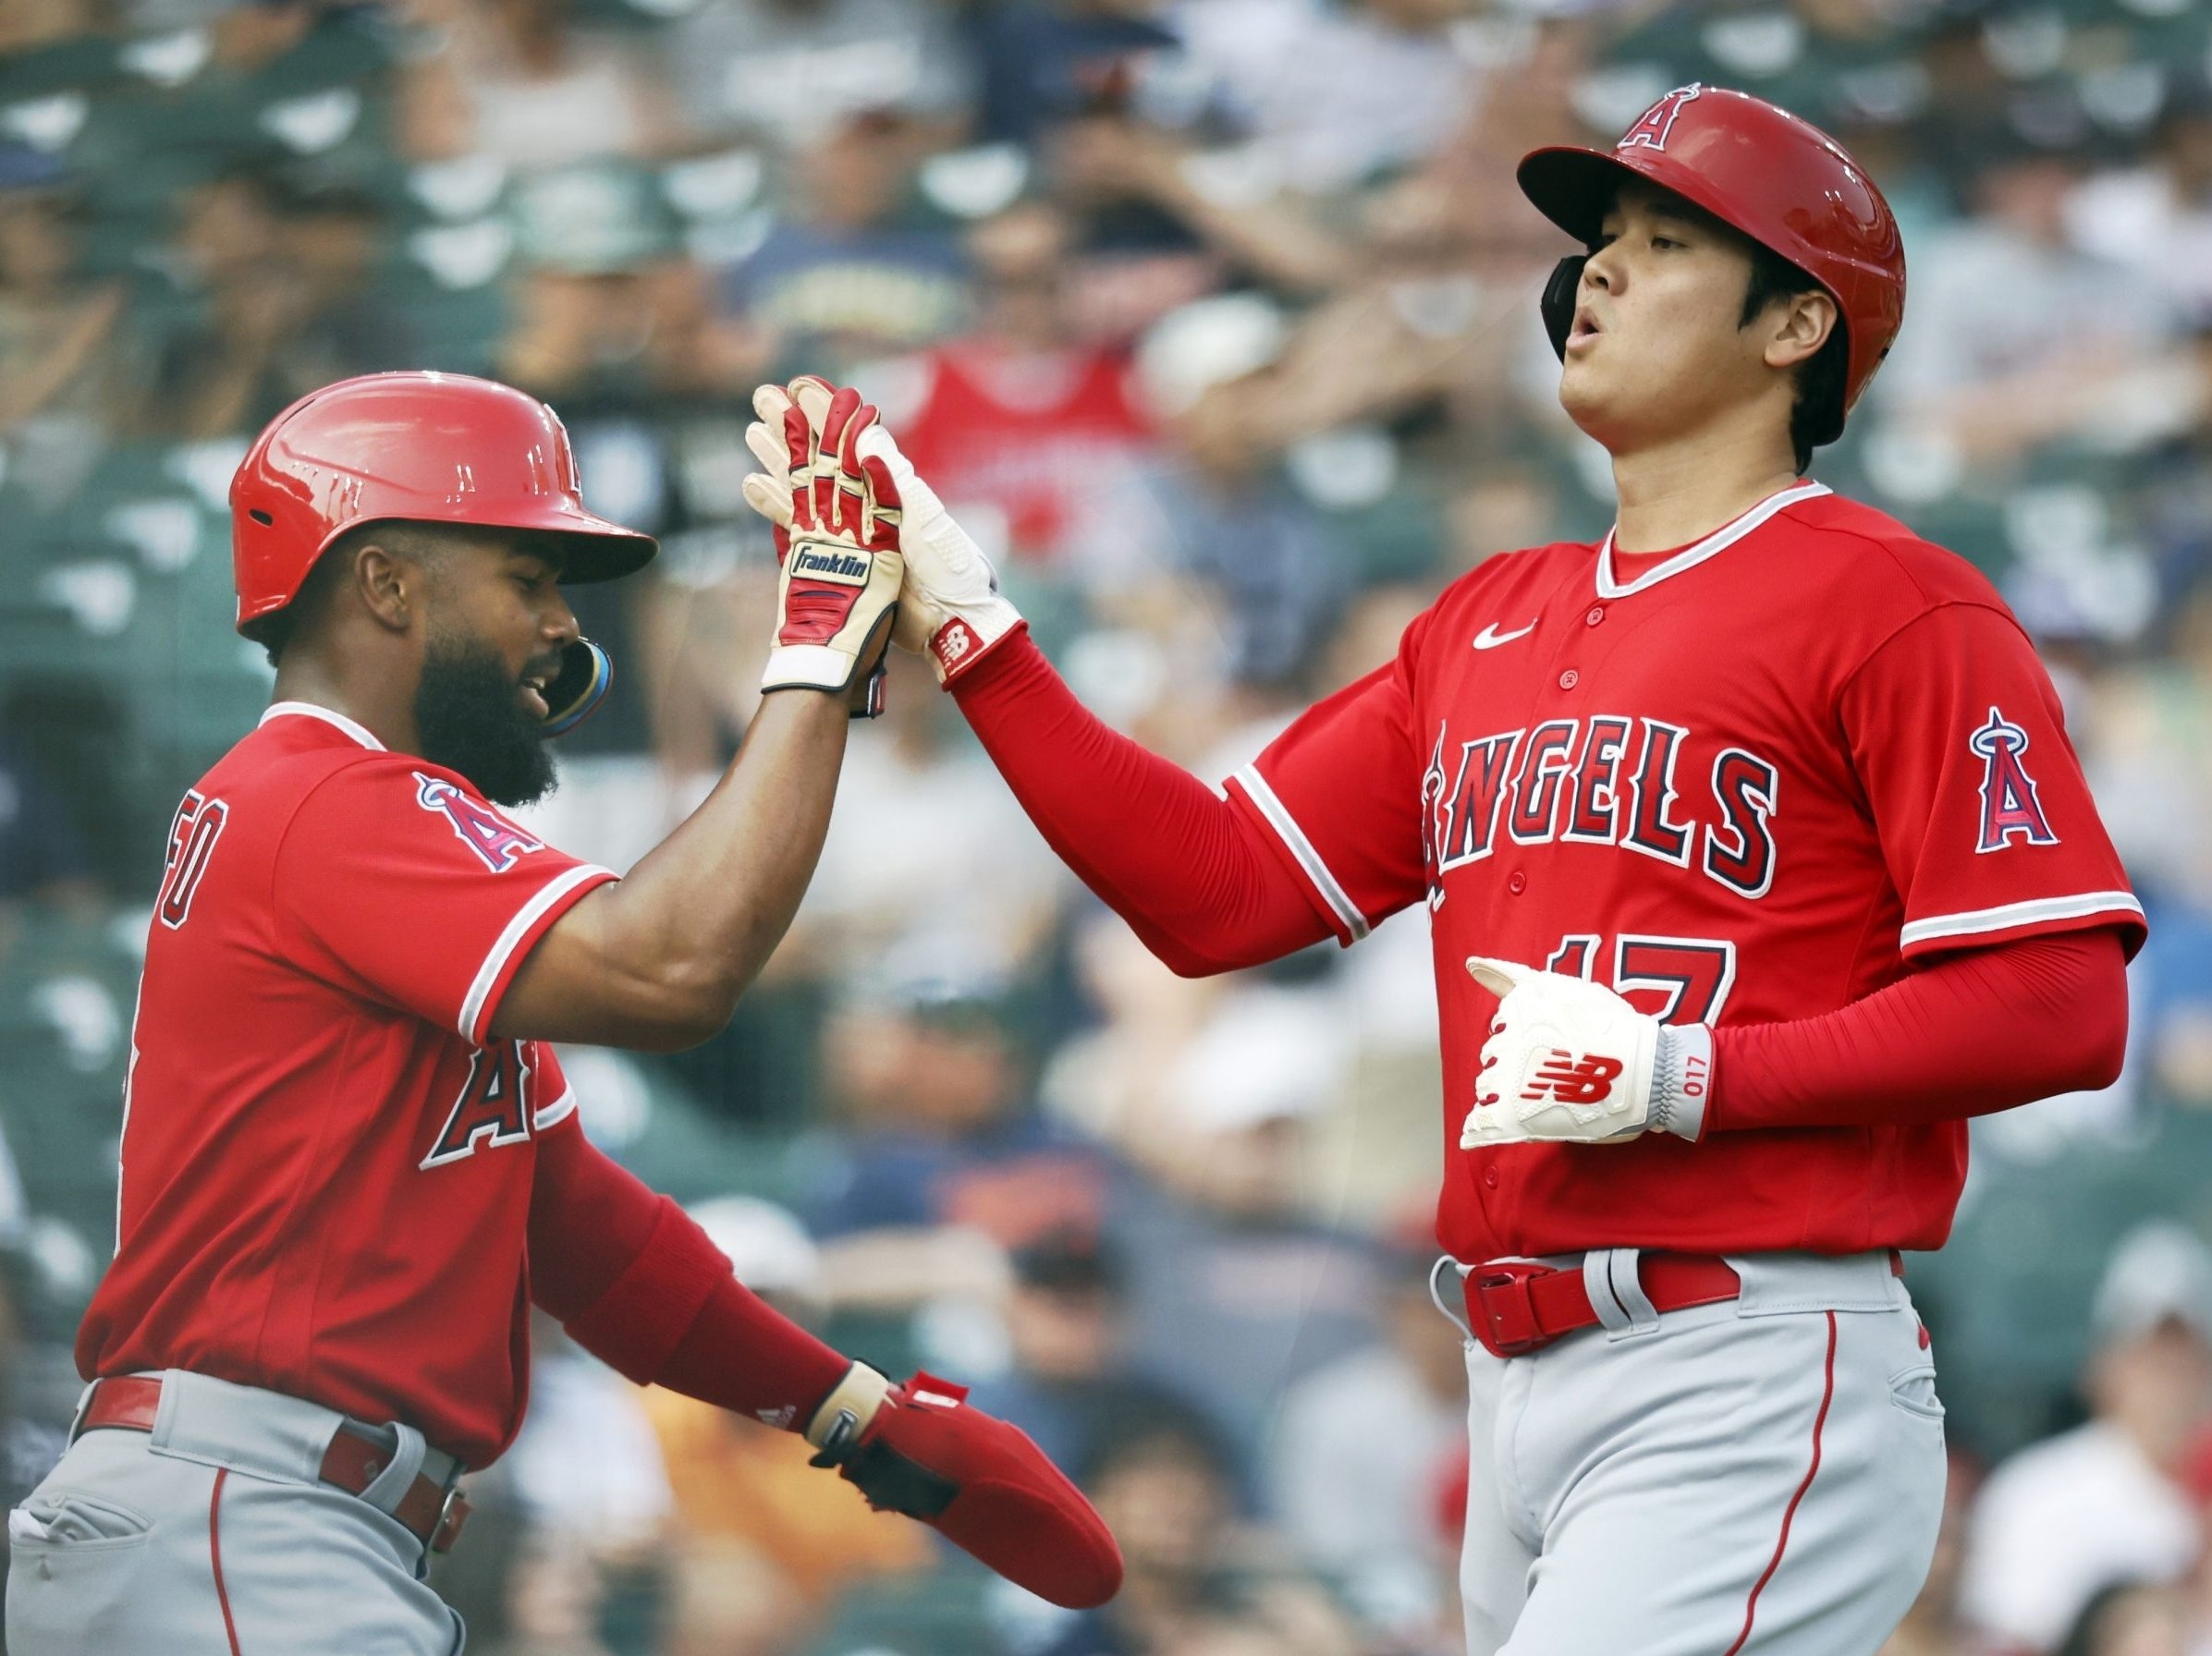 Mike Trout back on Angels' IL; Ohtani's pitching season over